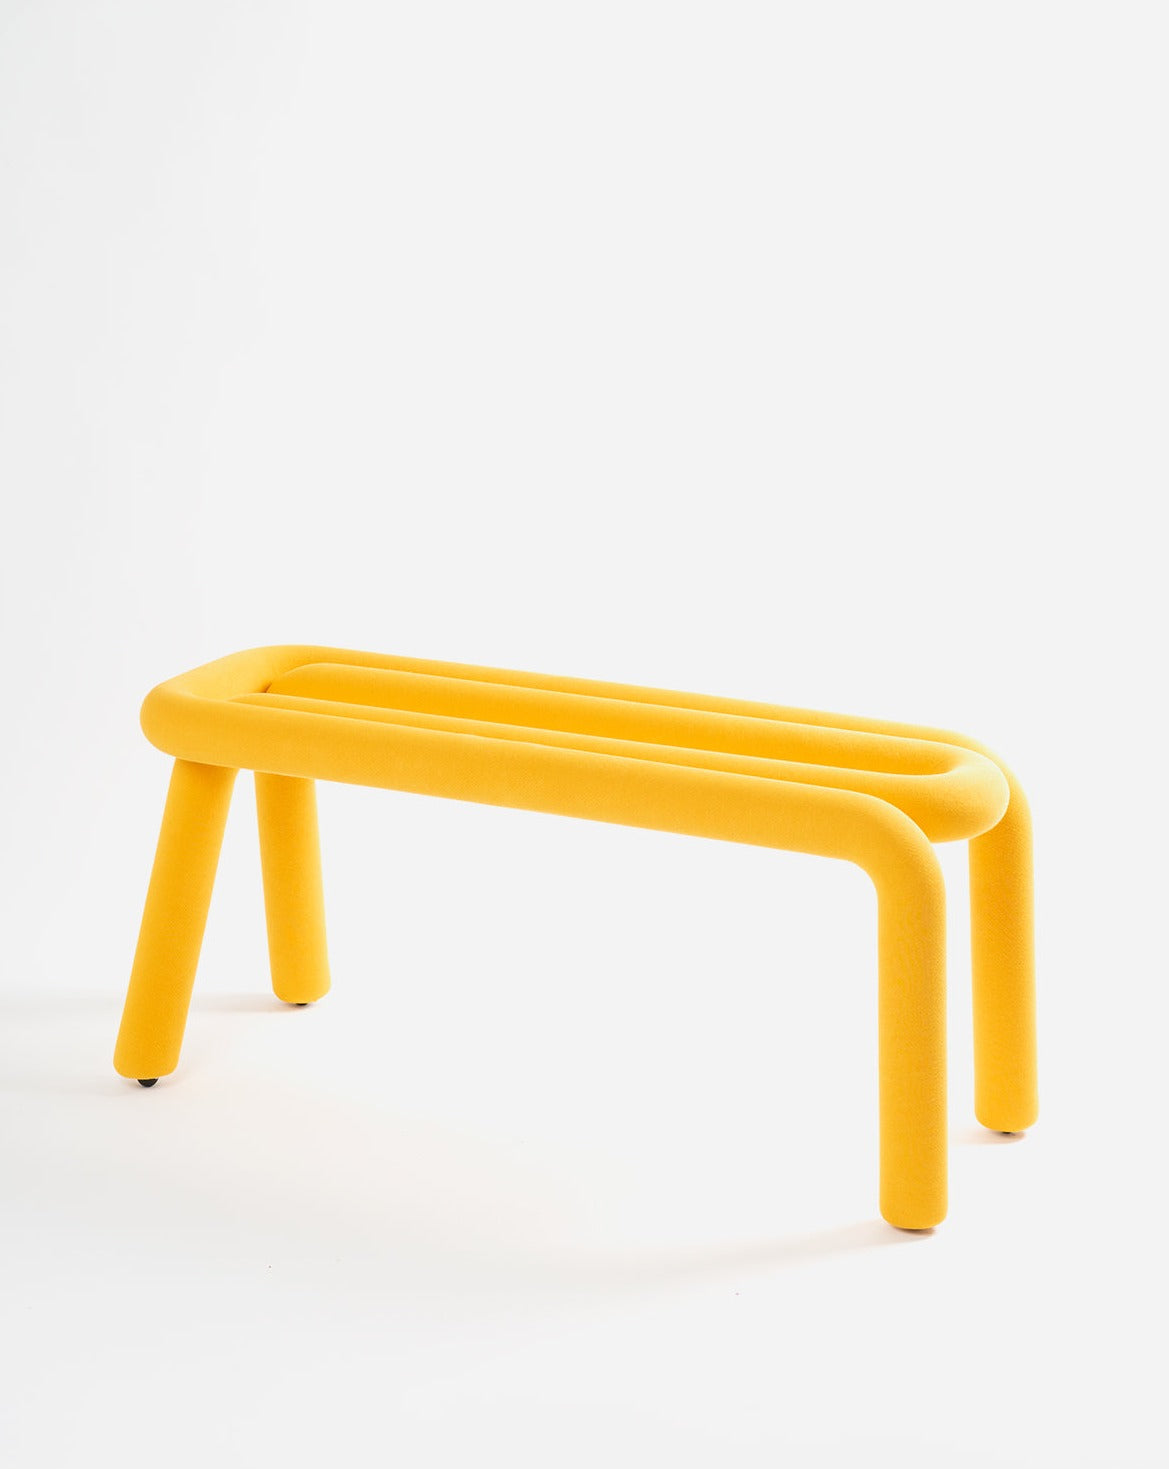 Moustache bold bench yellow